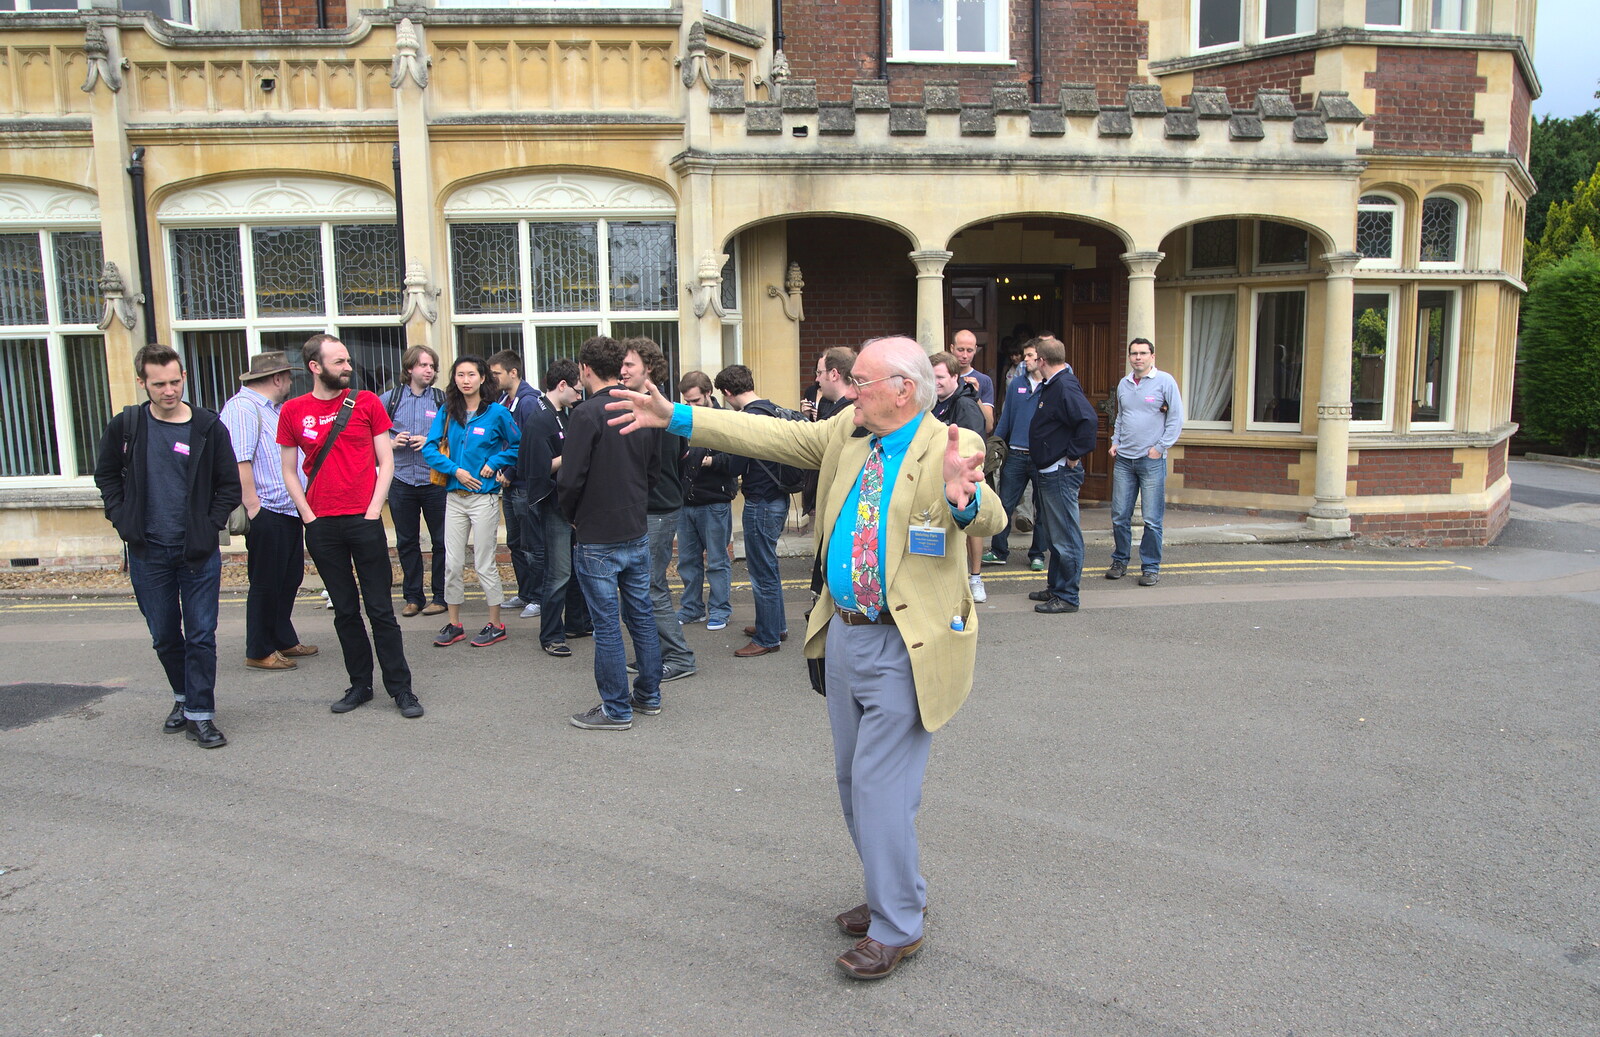 Our tour guide rounds us up from TouchType does Bletchley Park, Bletchley, Bedfordshire - 20th July 2012